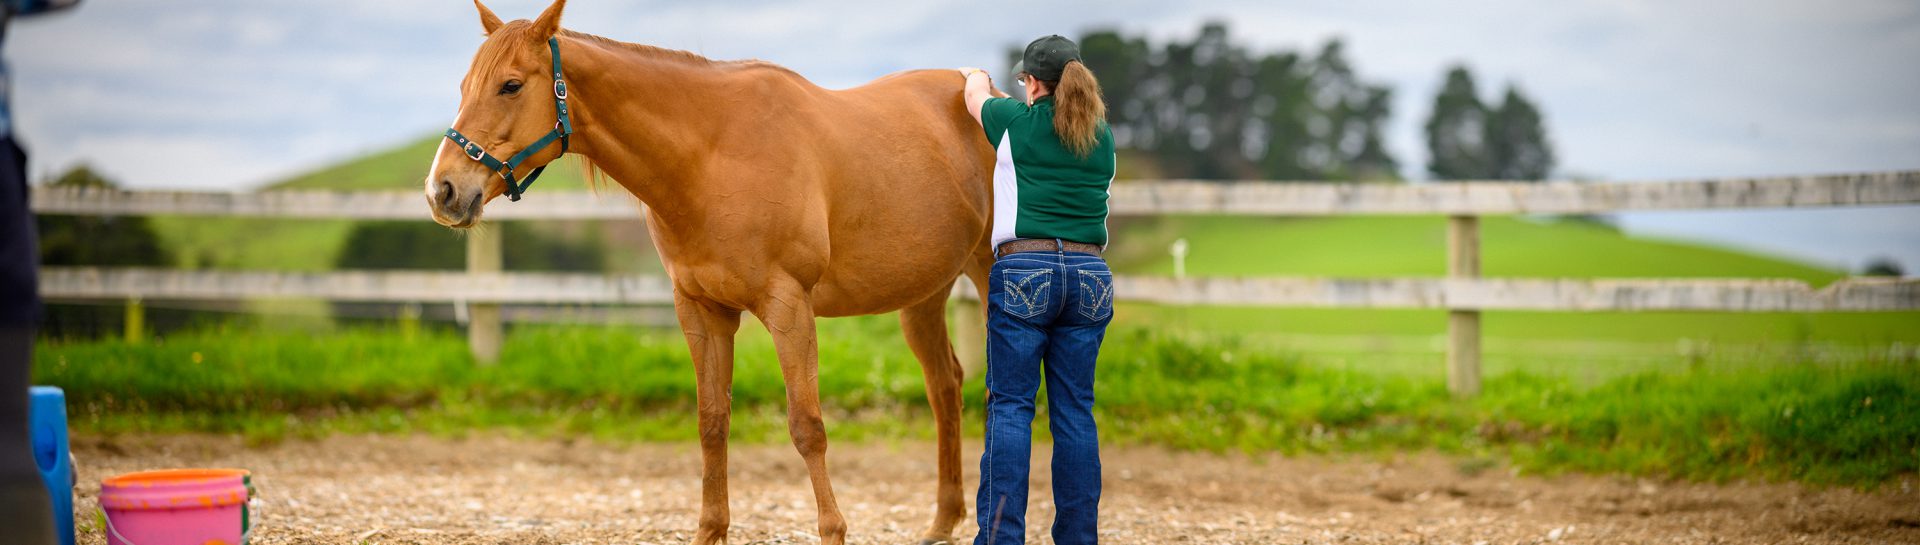 Equine Complimentary Therapy Image 1